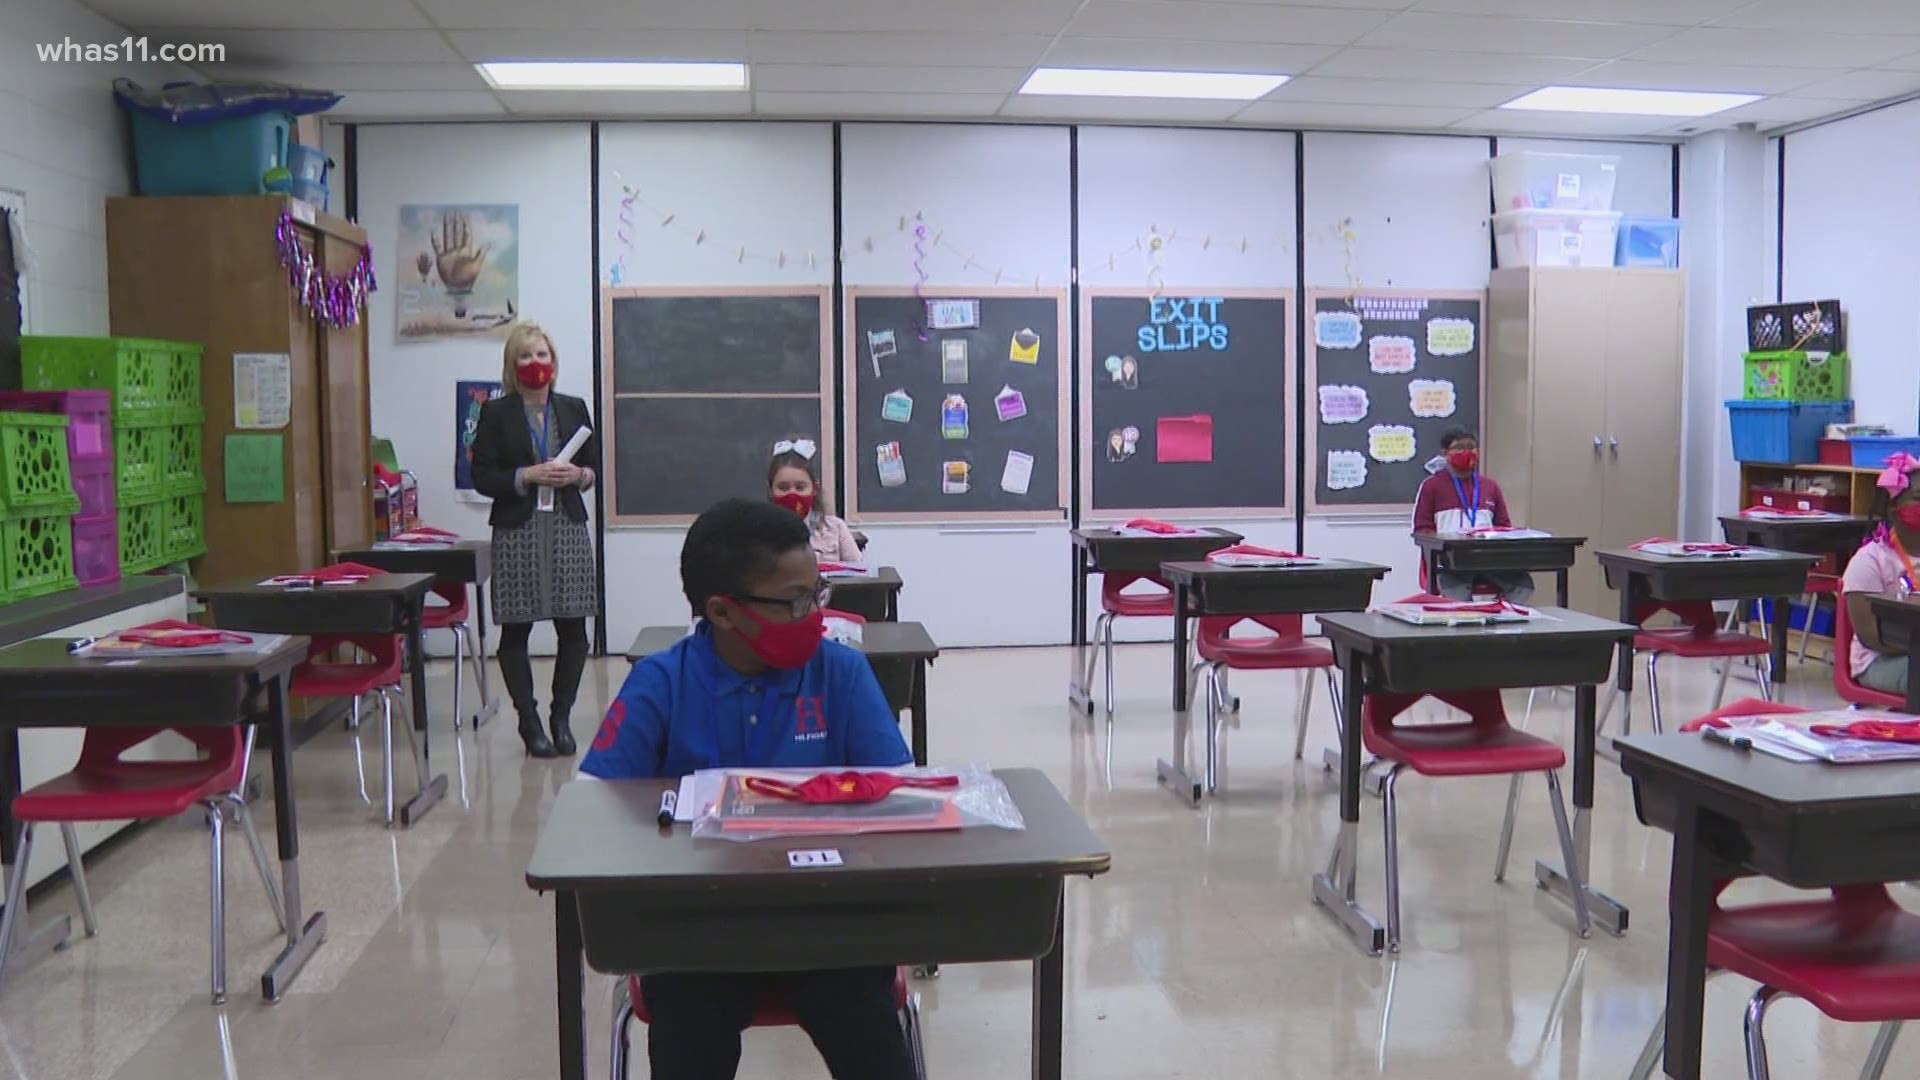 JCPS Superintendent Dr. Marty Pollio proposed a plan for reopening, in which kids would start going back to school the third week in March.